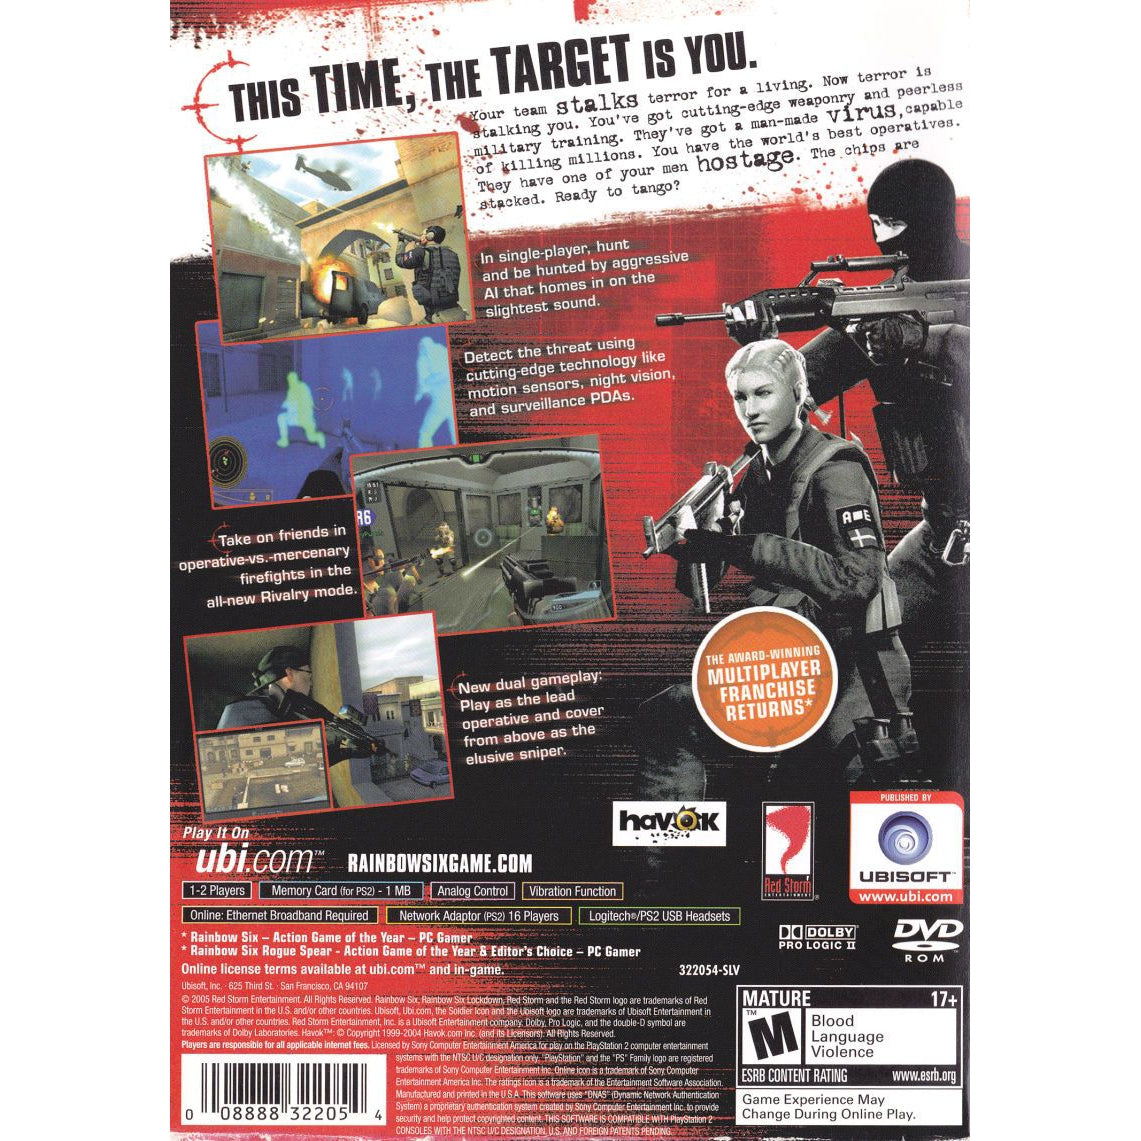 Tom Clancy's Rainbow Six: Lockdown - PlayStation 2 (PS2) Game Complete - YourGamingShop.com - Buy, Sell, Trade Video Games Online. 120 Day Warranty. Satisfaction Guaranteed.